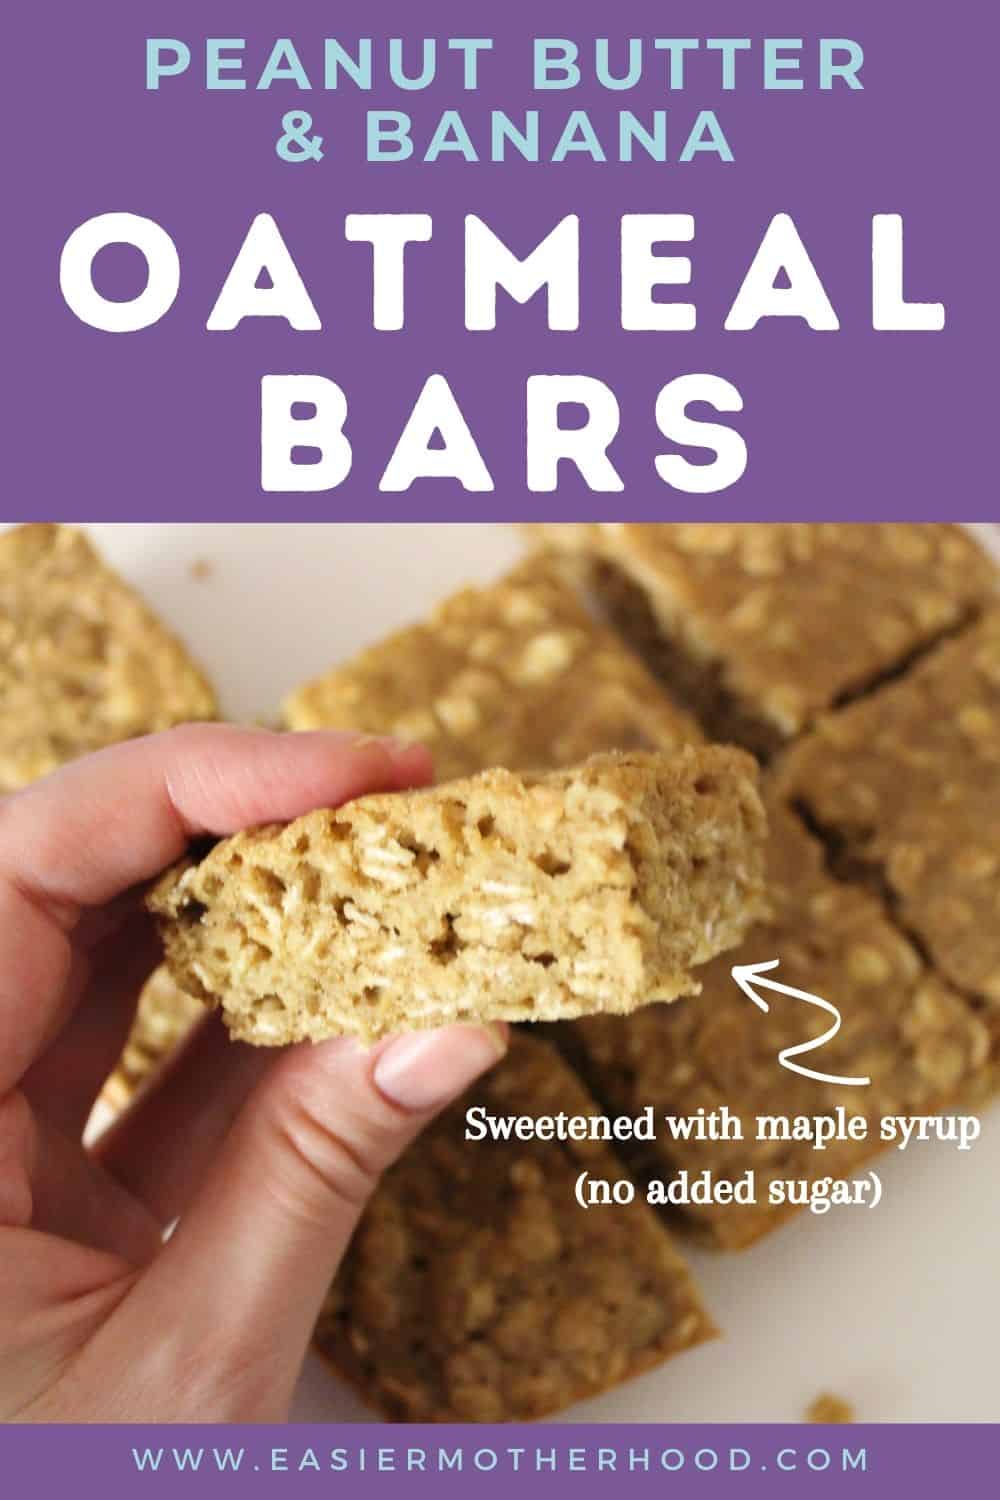 Above image, pin text reads "peanut butter & banana oatmeal bars", below is an image of finished bars on a cutting board with one shown held in a left hand. There is an arrow pointing to the bar being held with call out text reading "sweetened with maple syrup (no added sugar)"